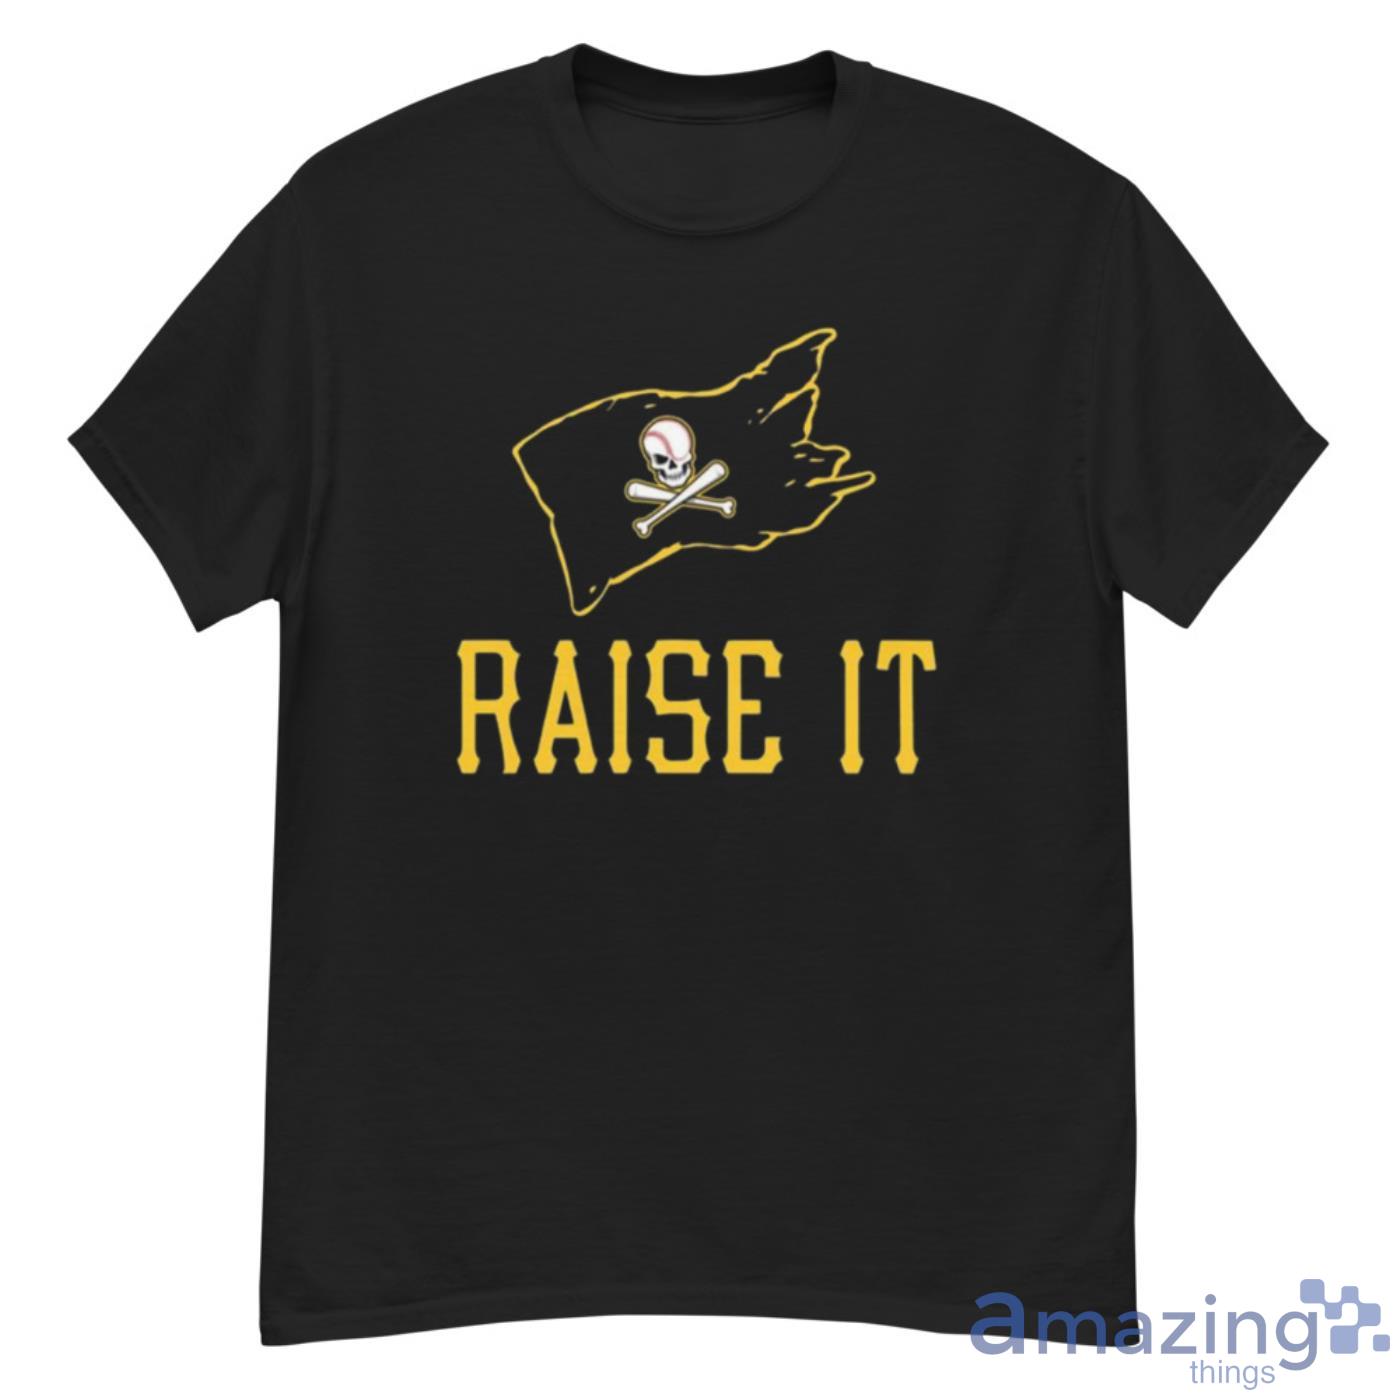 Raise the Jolly Roger Pittsburgh Steelers Shirt